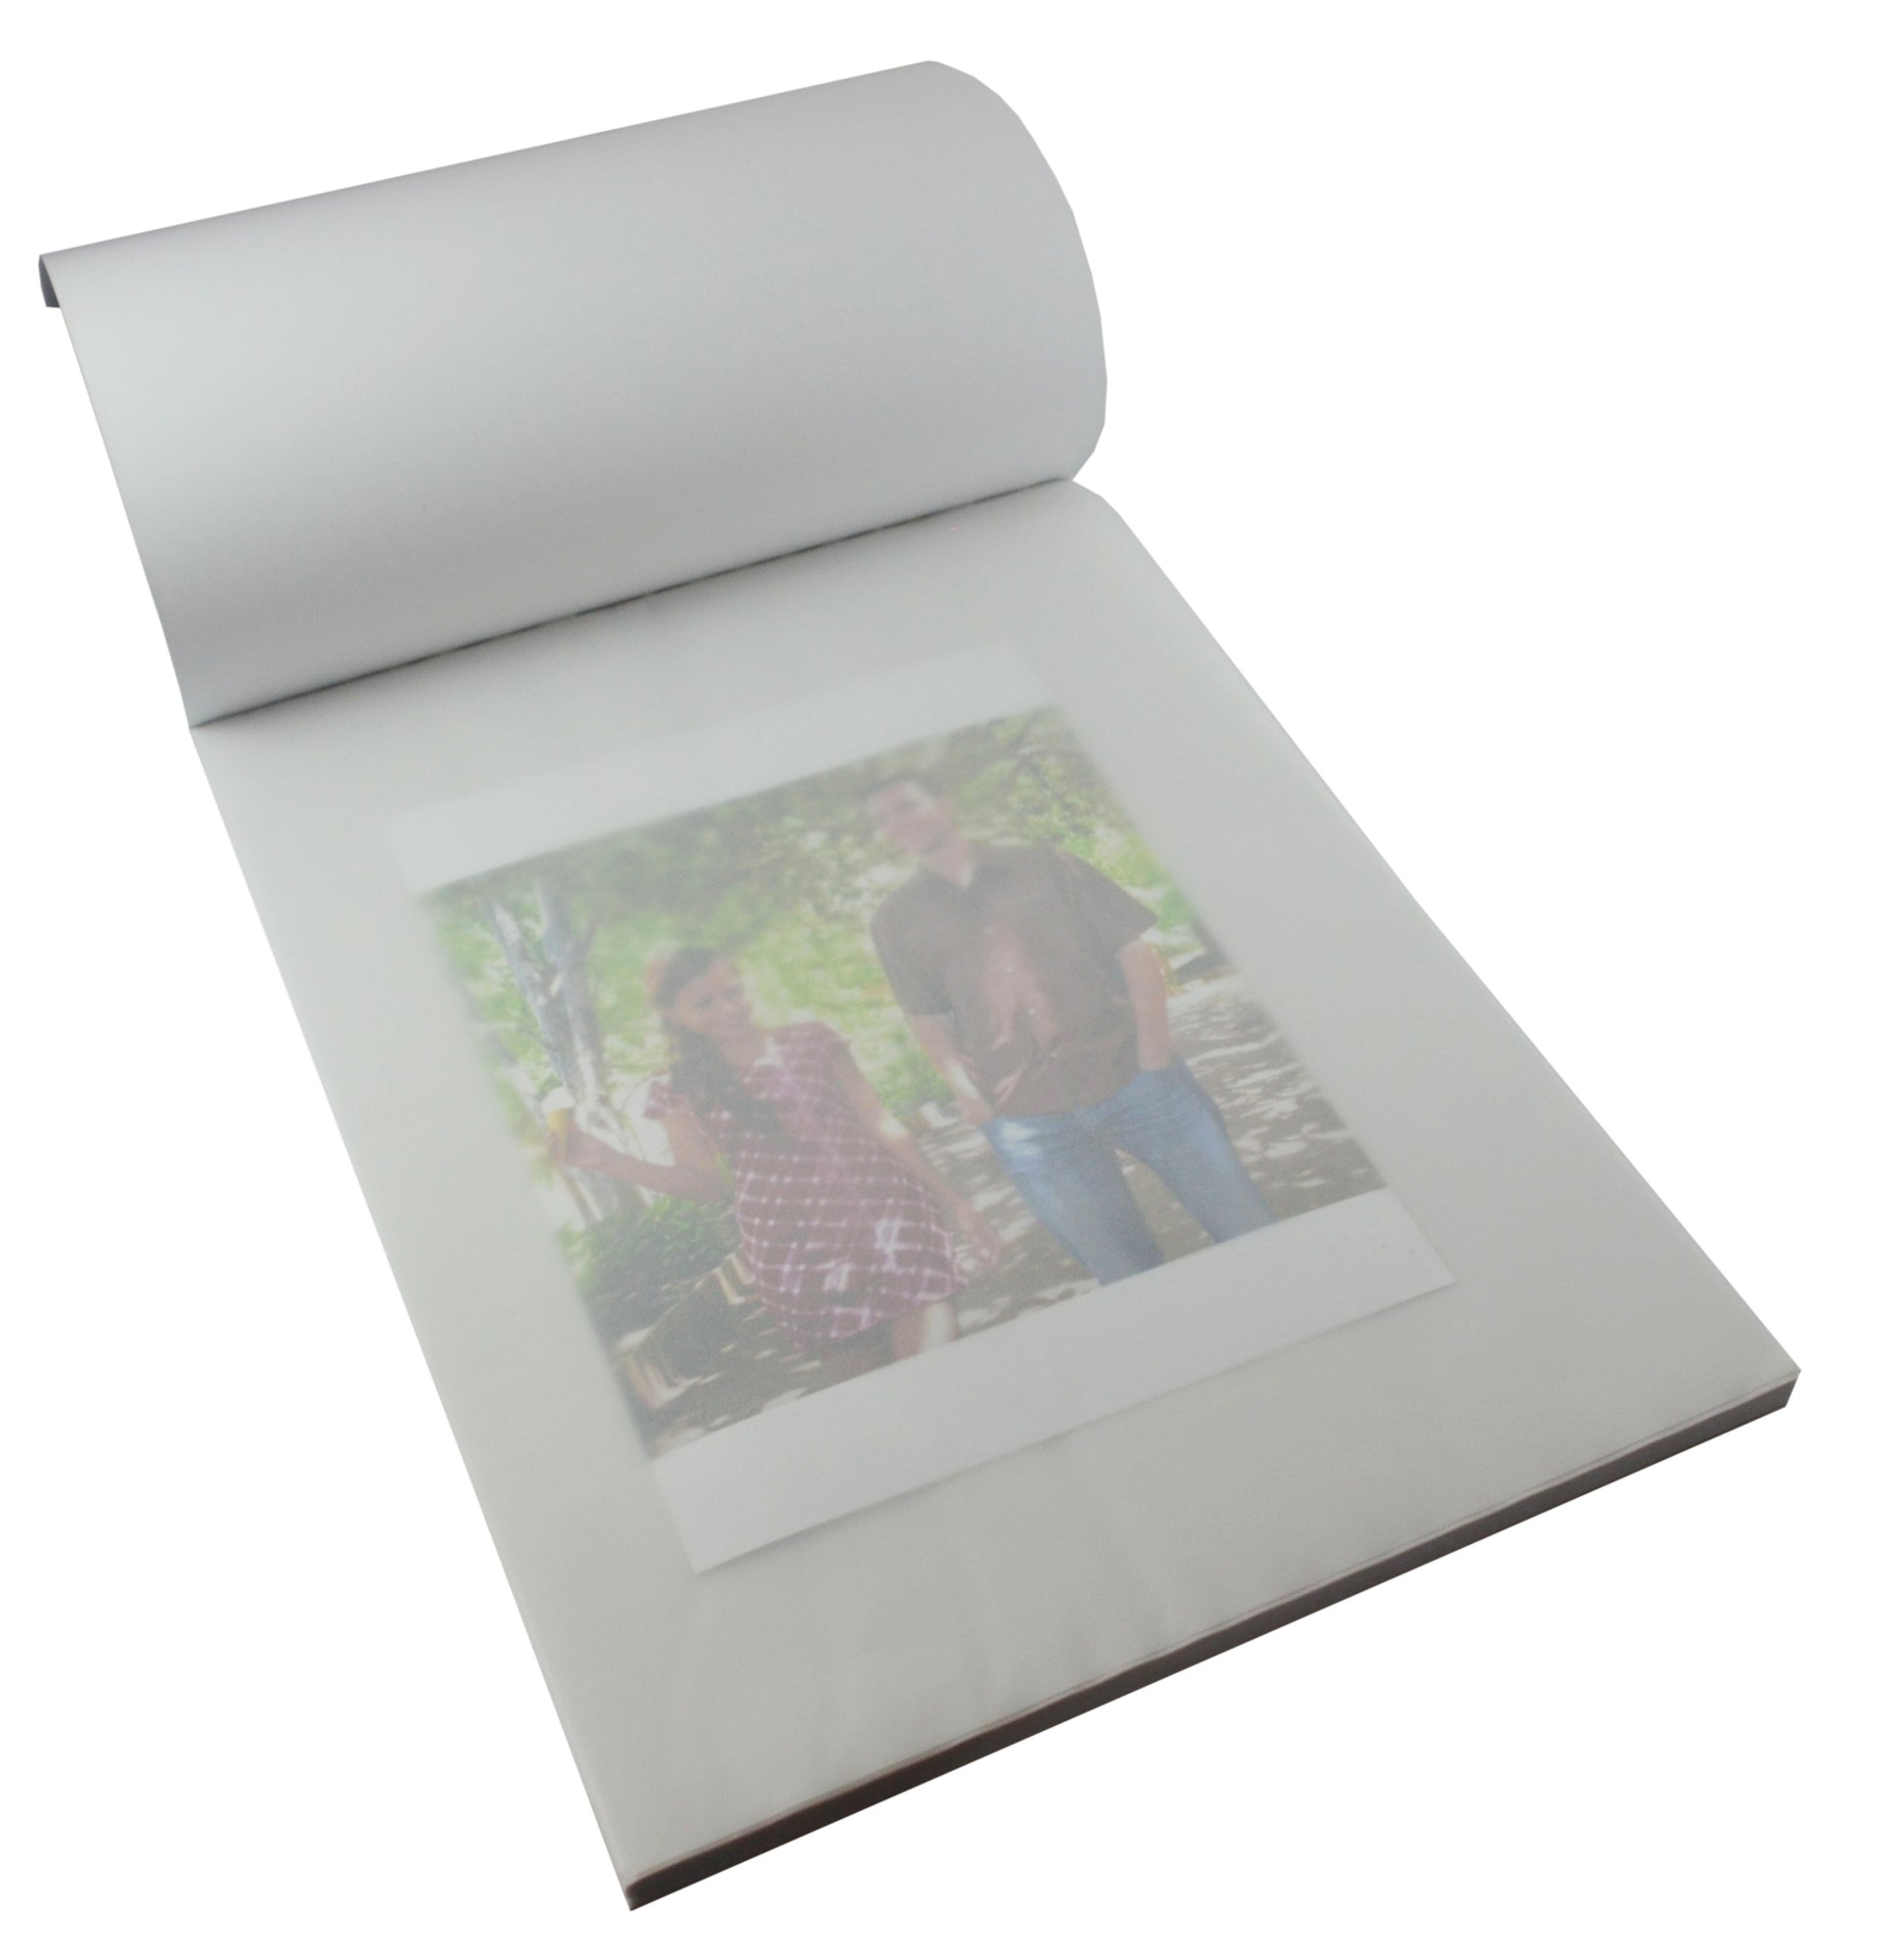 Graphite Transfer Paper, 9 x 13 - 25 Sheets - Black Waxed Paper